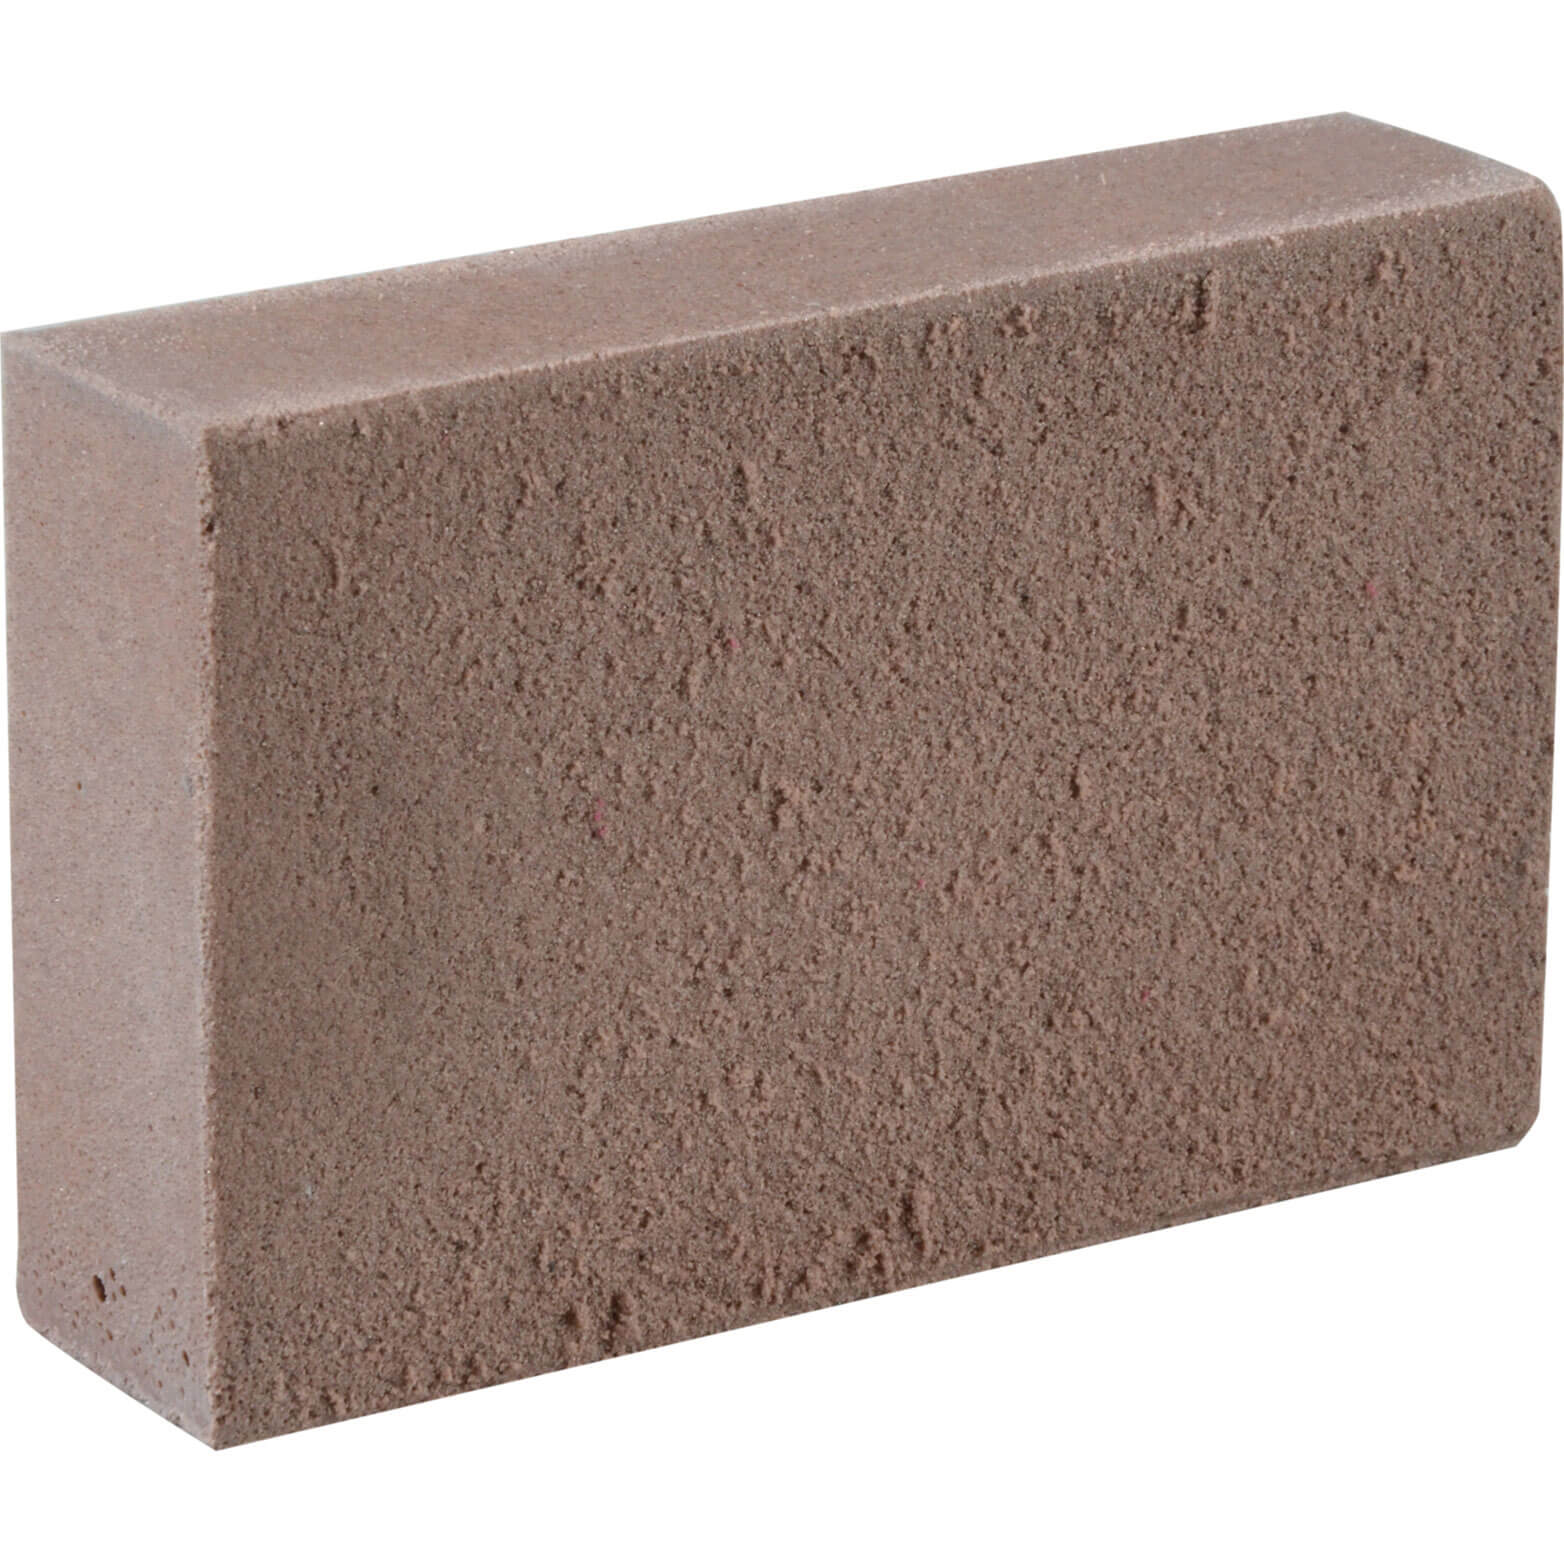 Click to view product details and reviews for Garryson Garryflex Abrasive Block Fine.